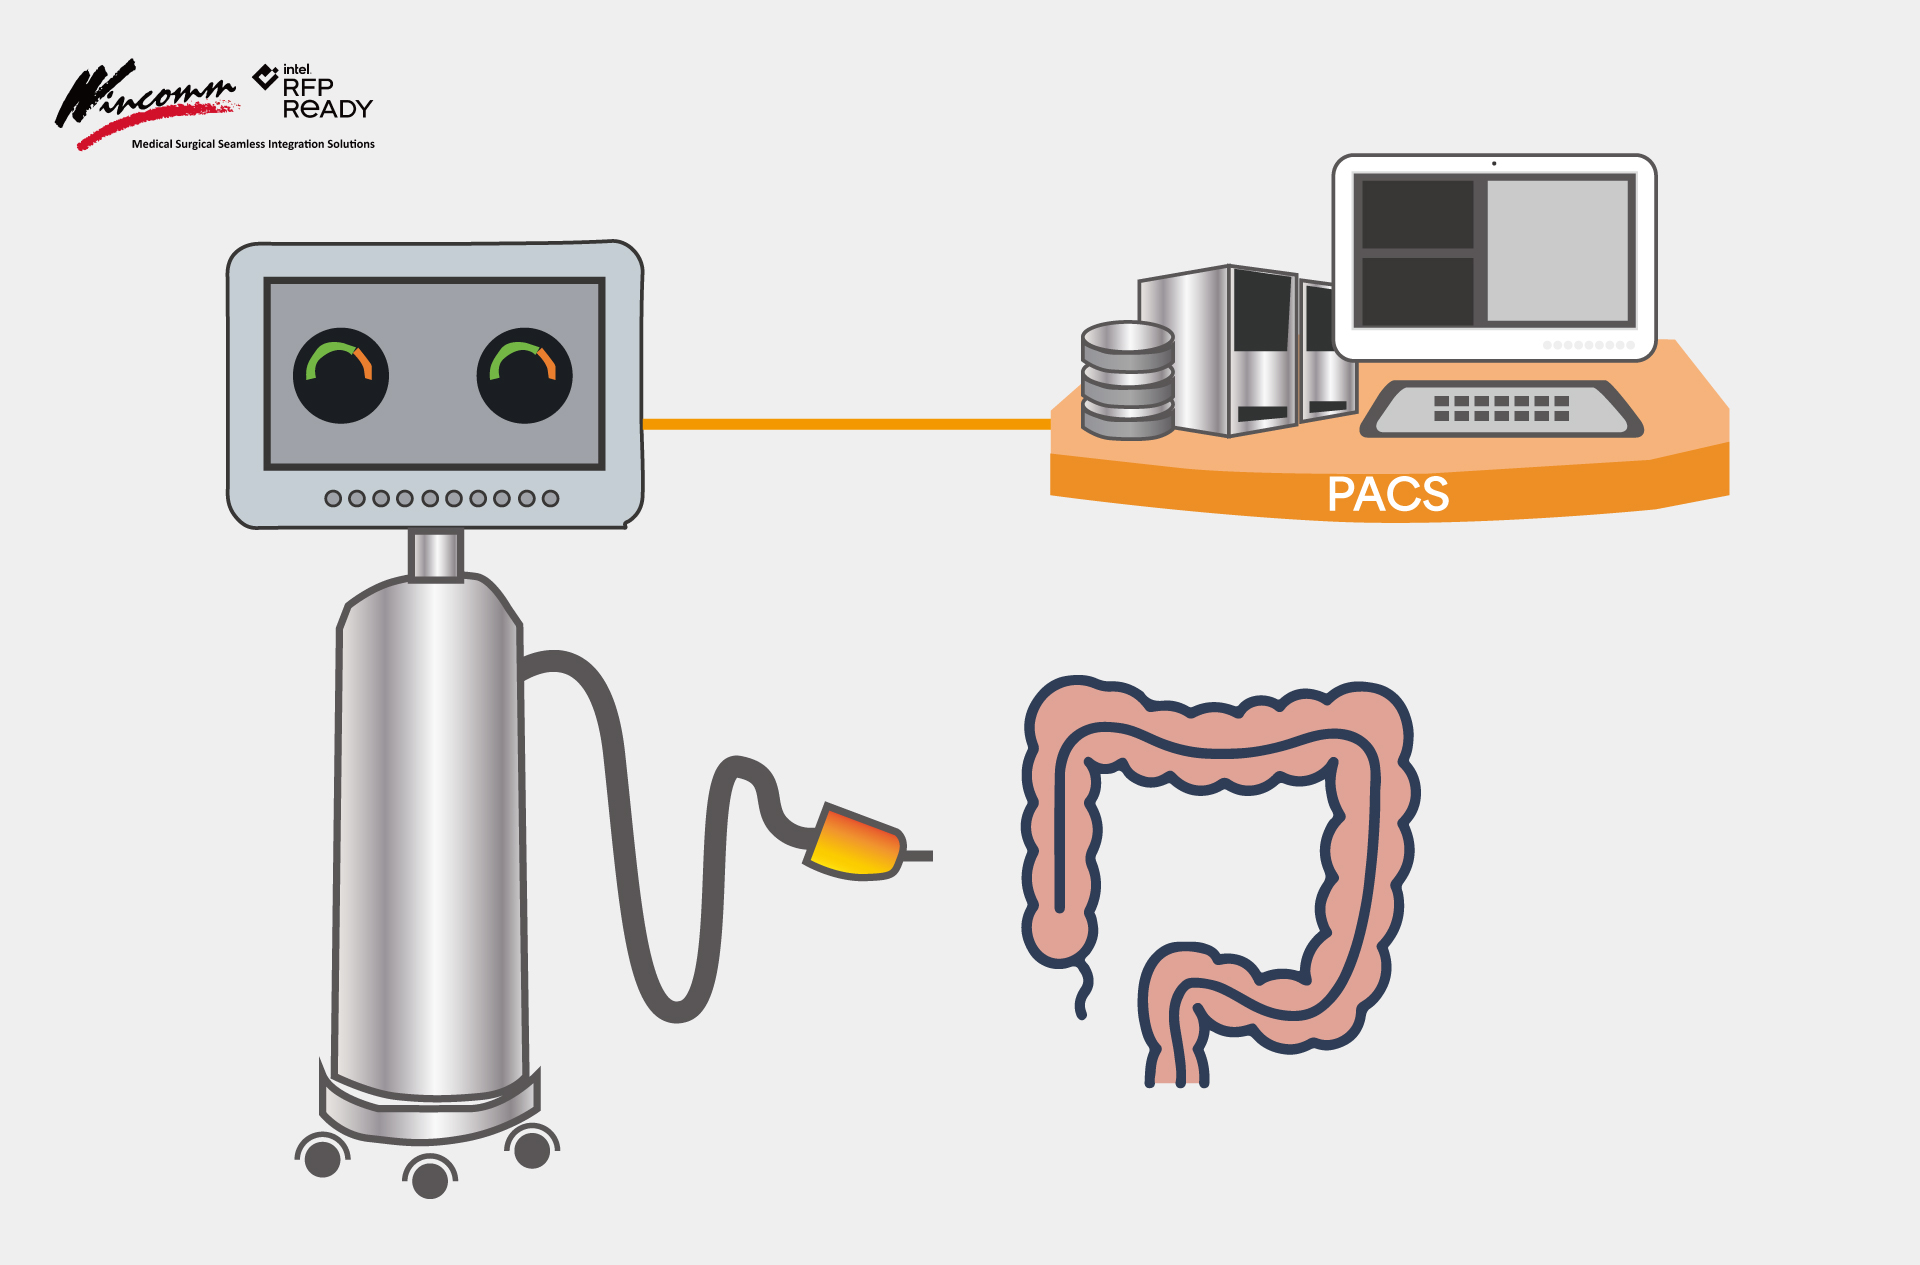 proimages/news/Successful_Stories/Innovation_Colonoscopy_Application_–Remote_Control_Panel/application-diagram_Colonoscopy-application.jpg